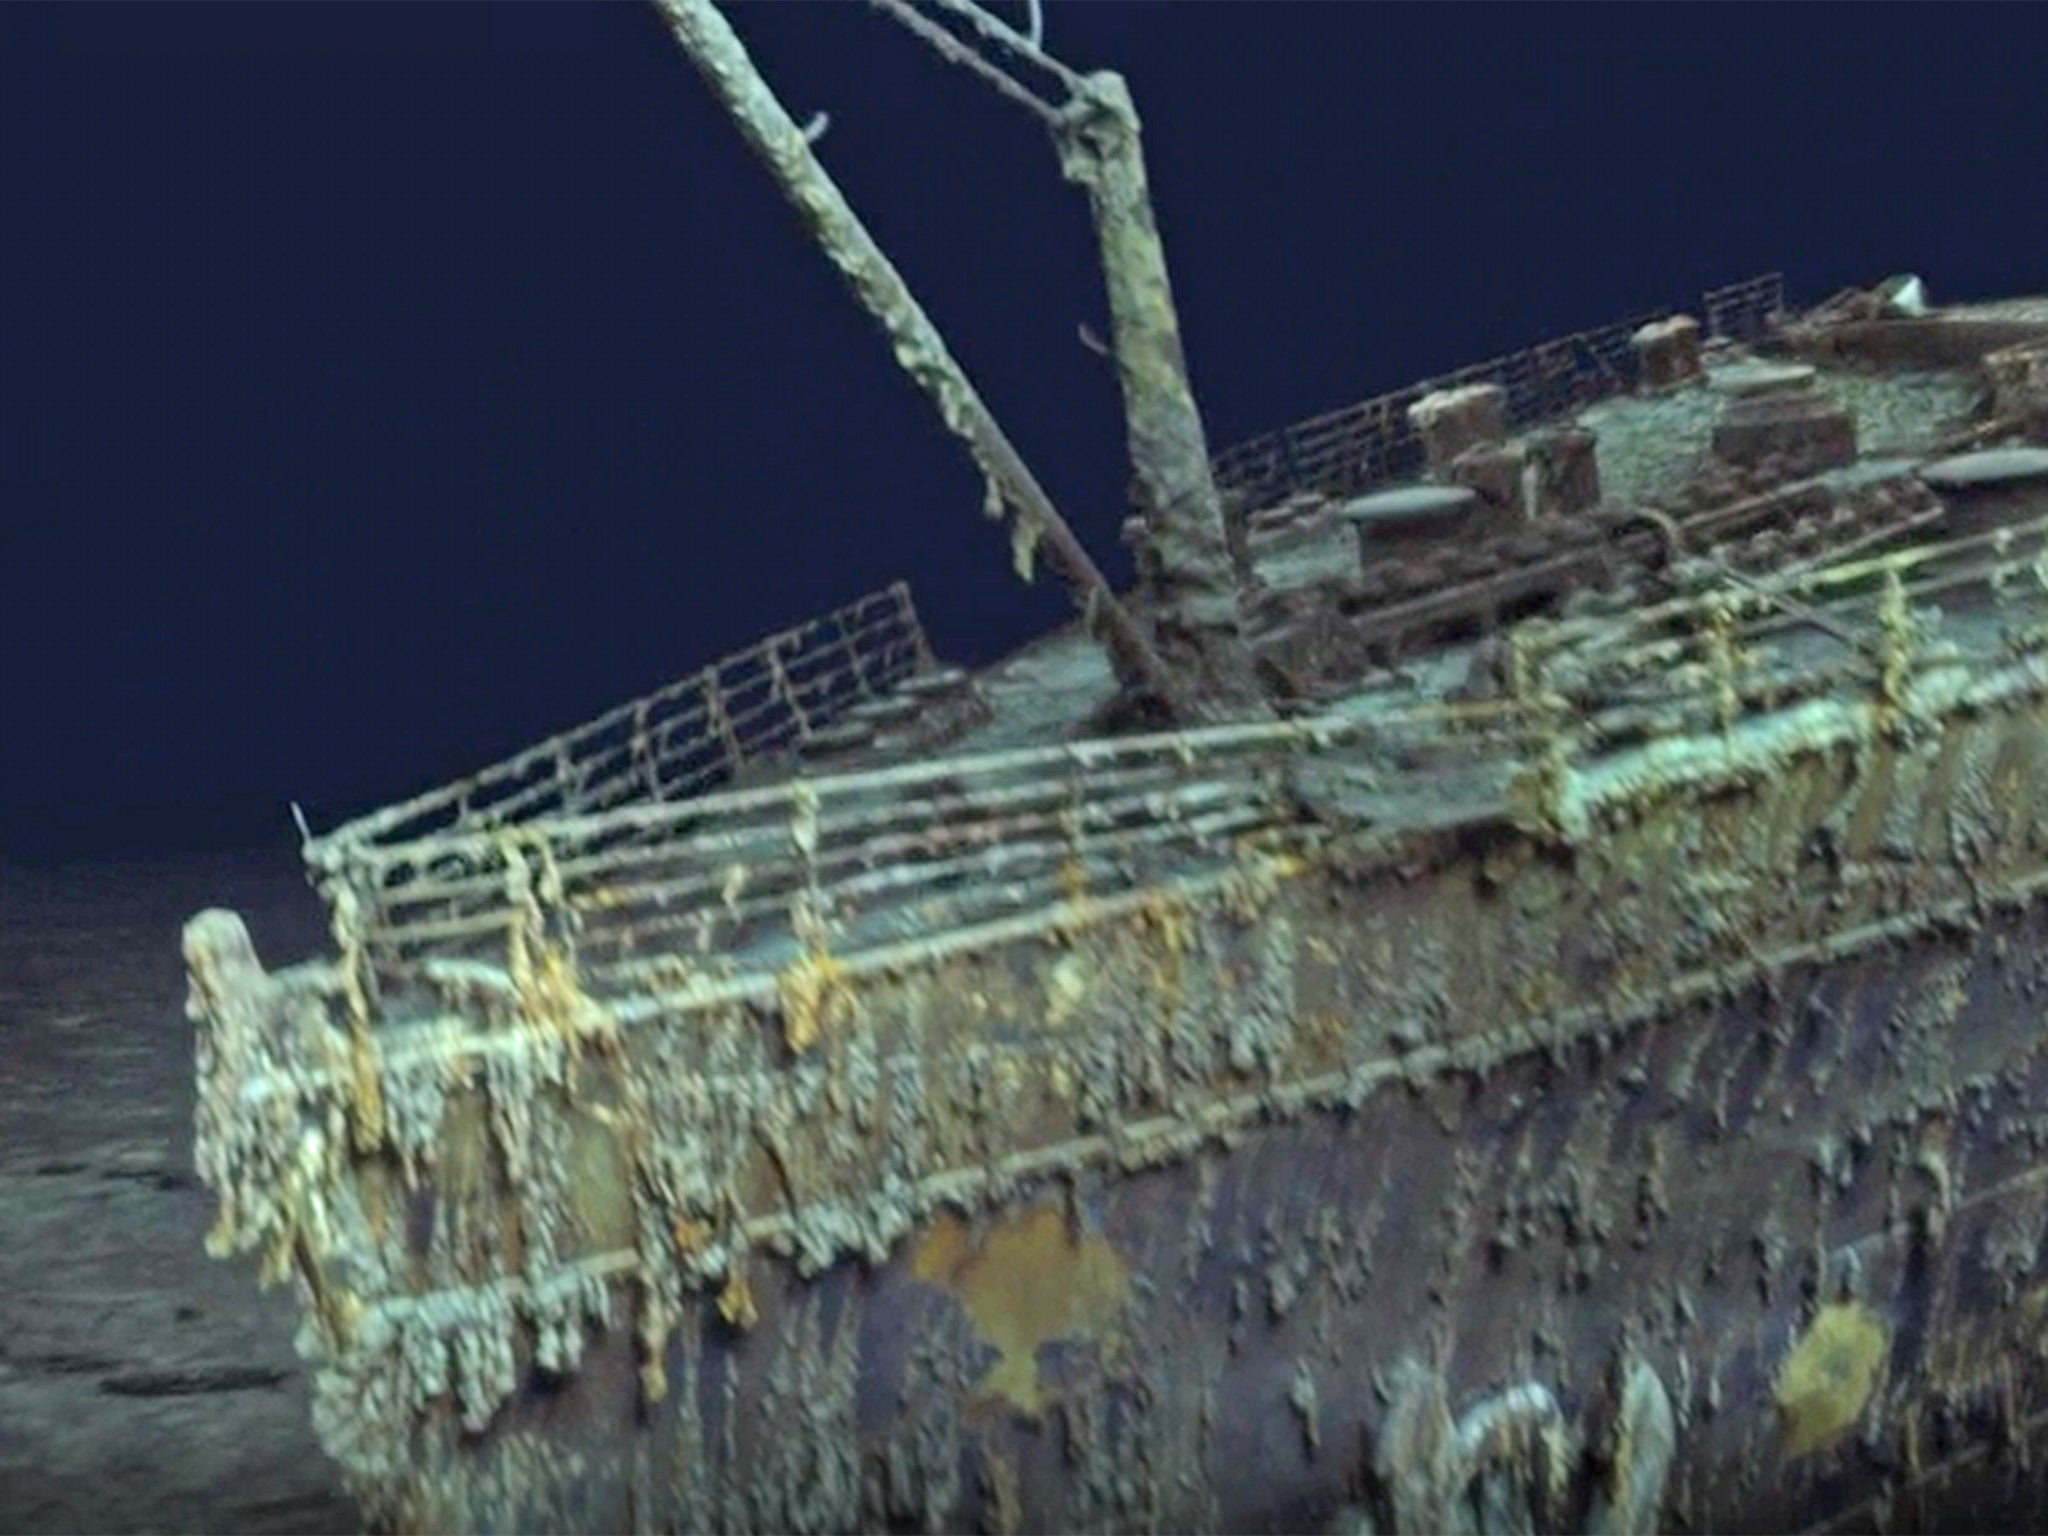 Titanic wreckage at the bottom of the ocean